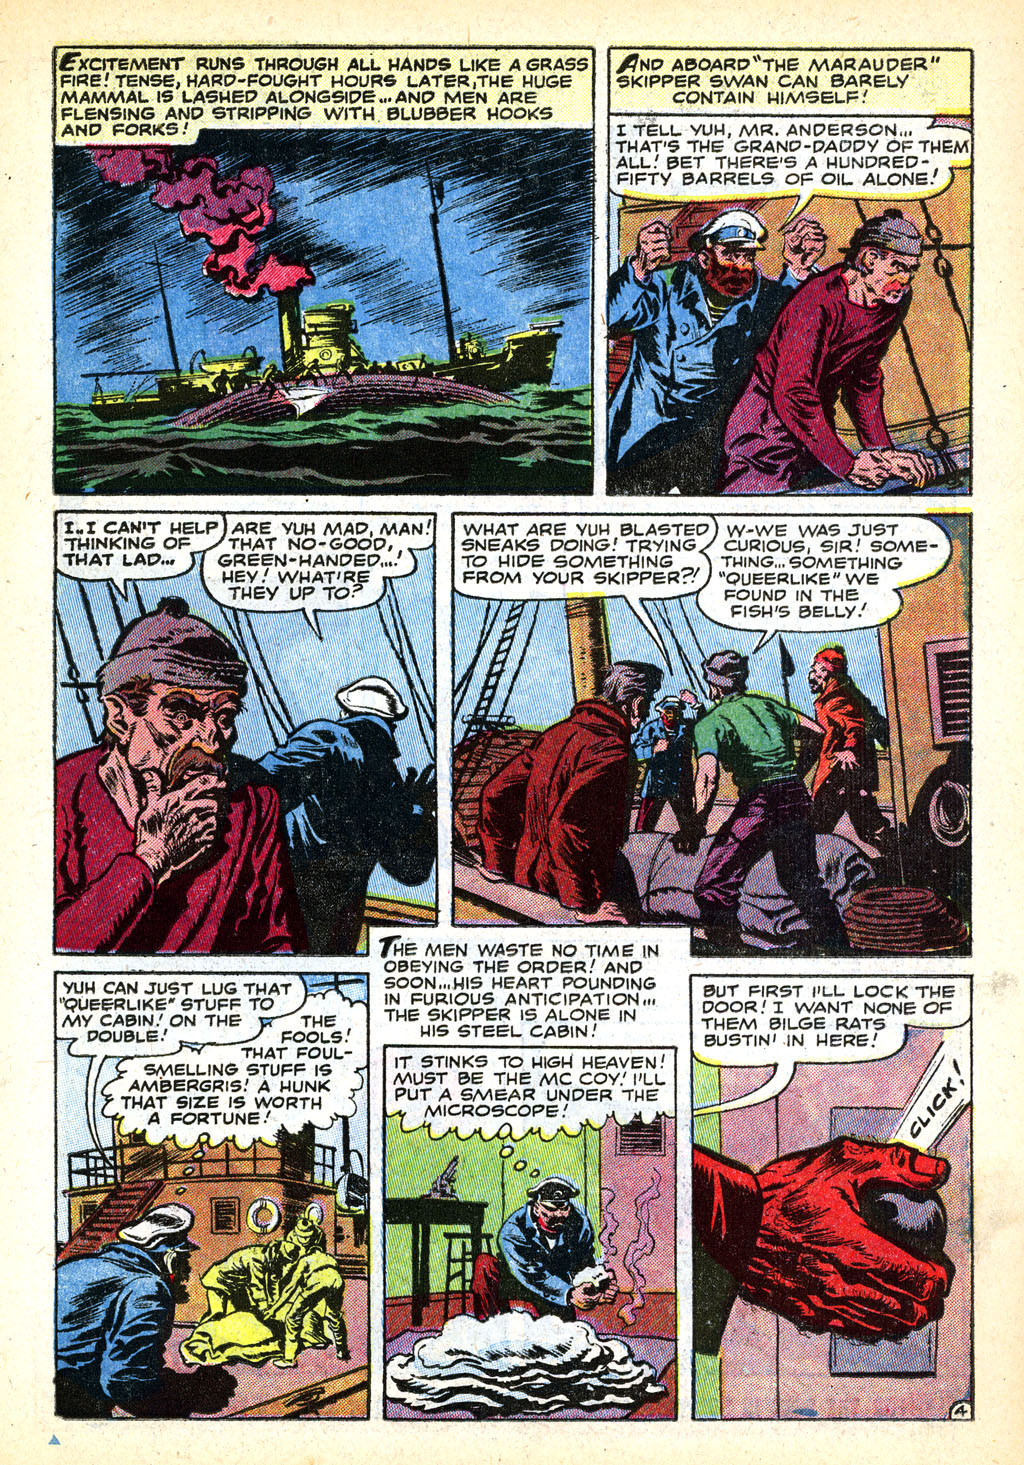 Marvel Tales (1949) 112 Page 14